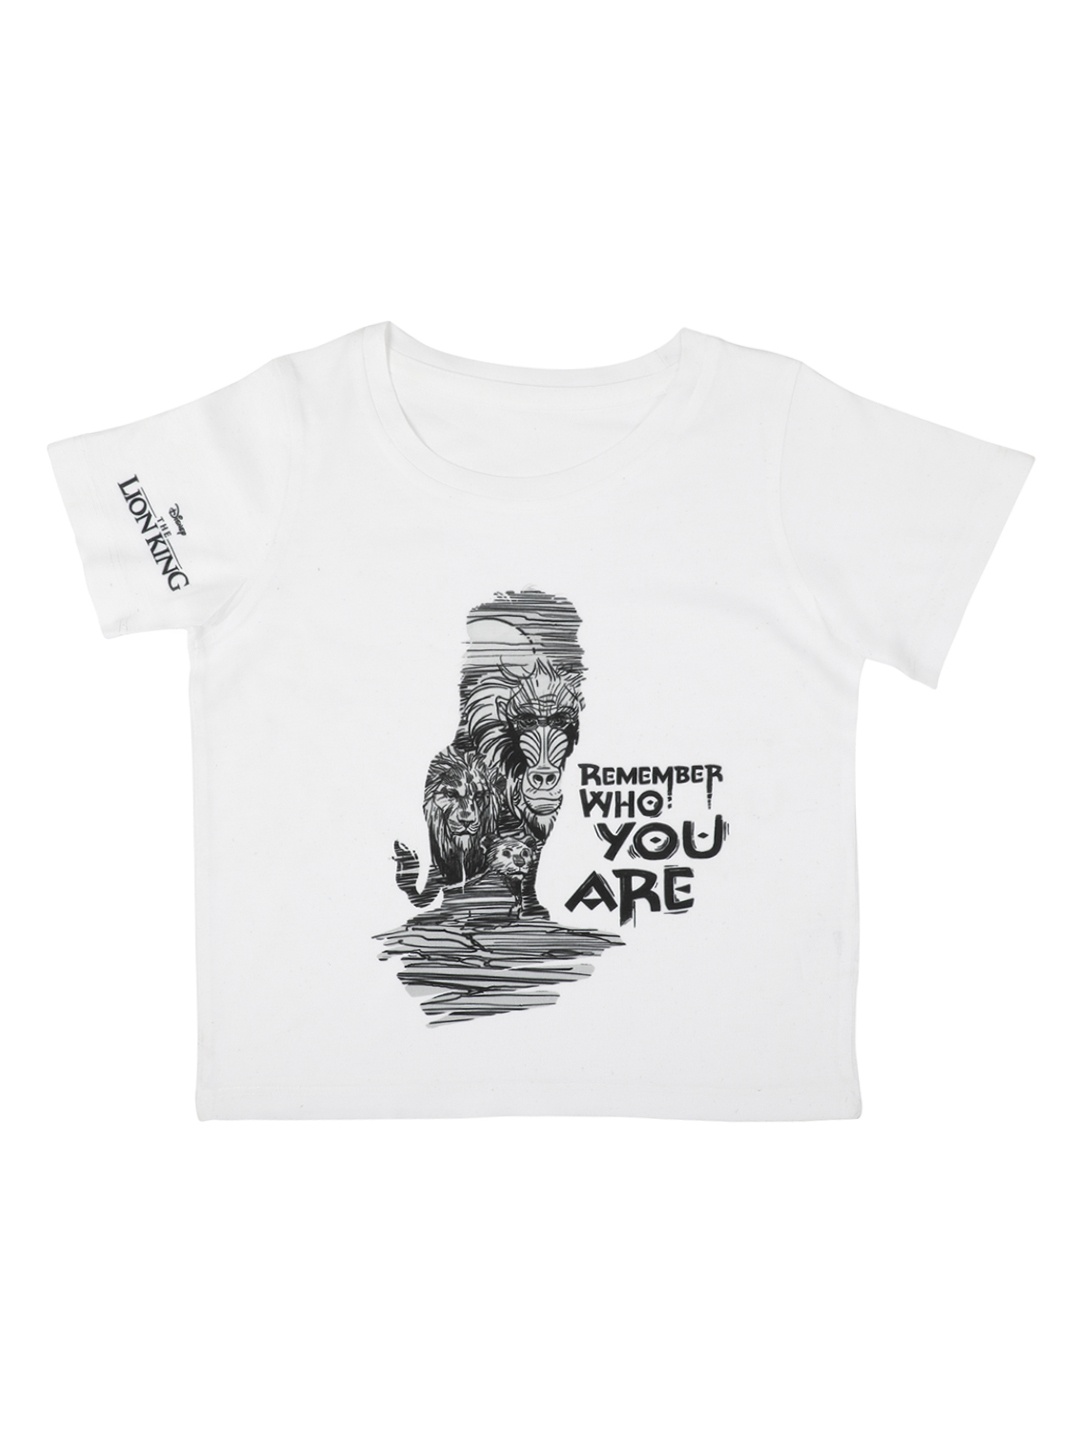 

Disney by Wear Your Mind Boys White Printed Round Neck T-shirt